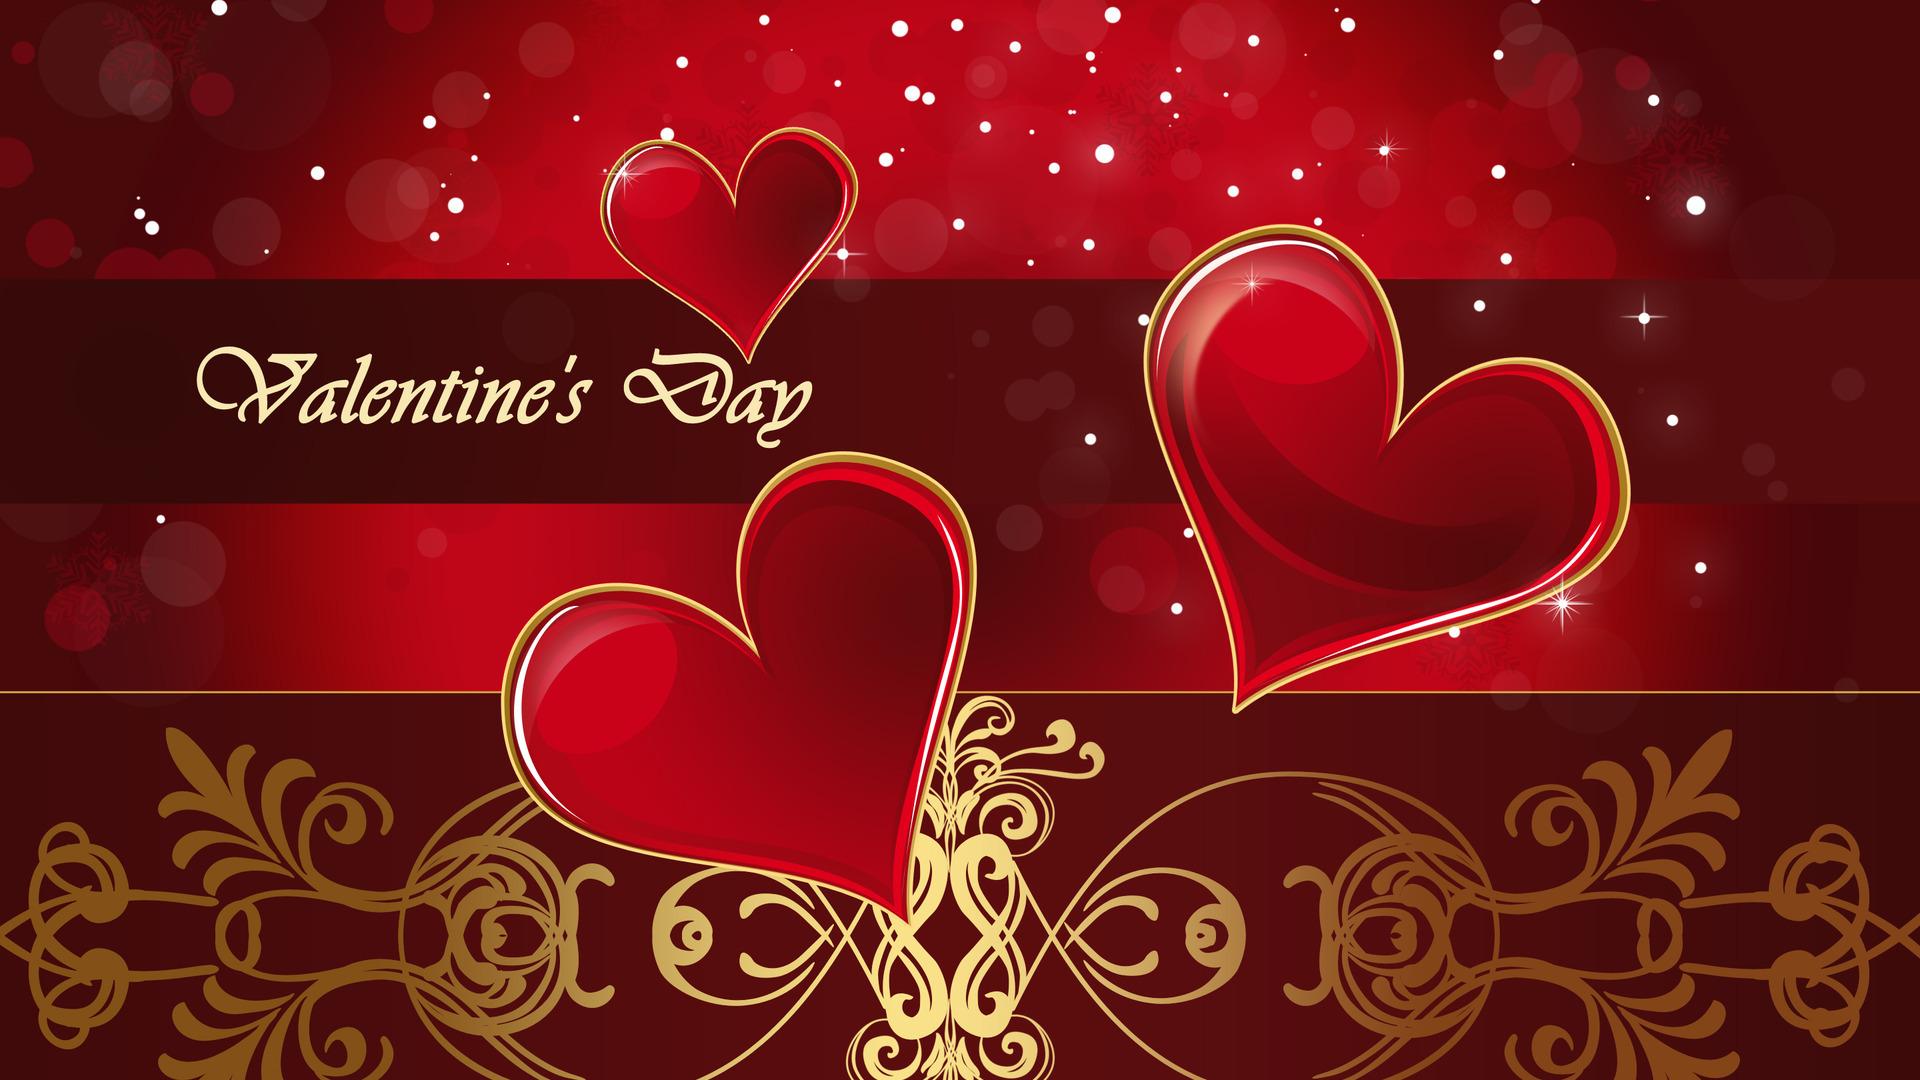 Happy Valentines Day Images Pics Photos Wallpapers 2020 Hd